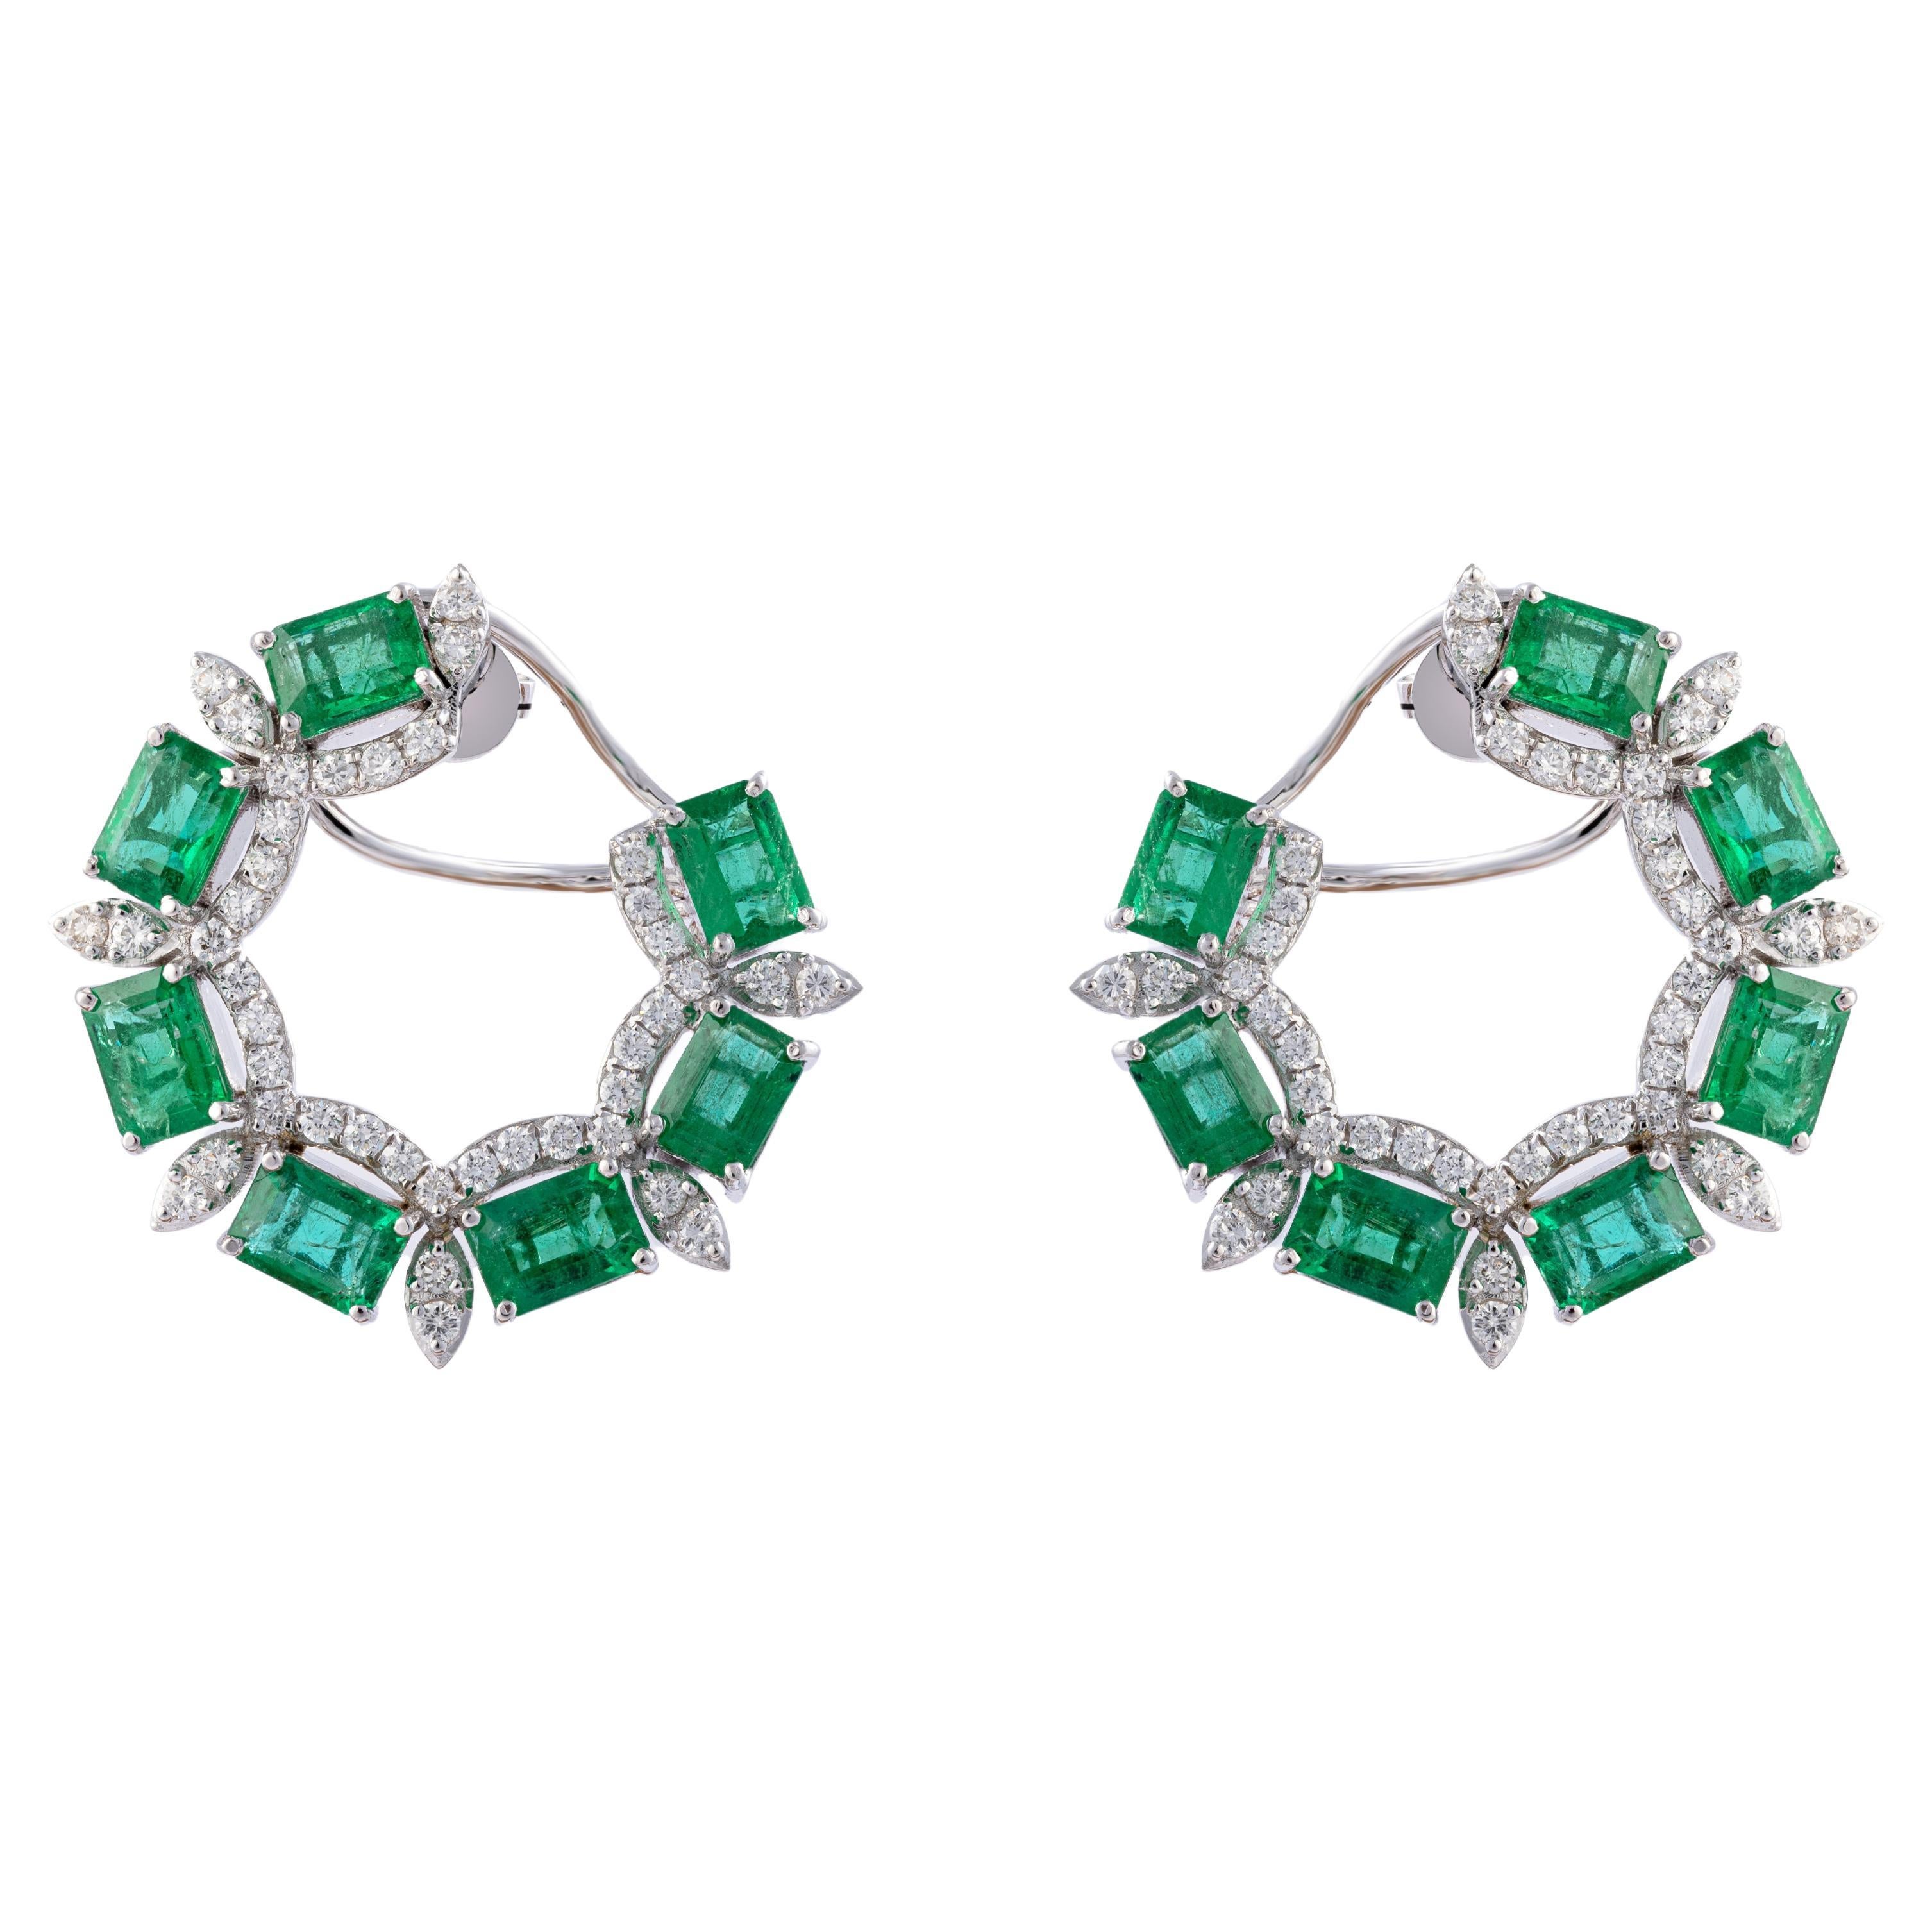 13.04 carats Natural Zambian Emerald and 2.25 carats Diamond Earring in 14k Gold